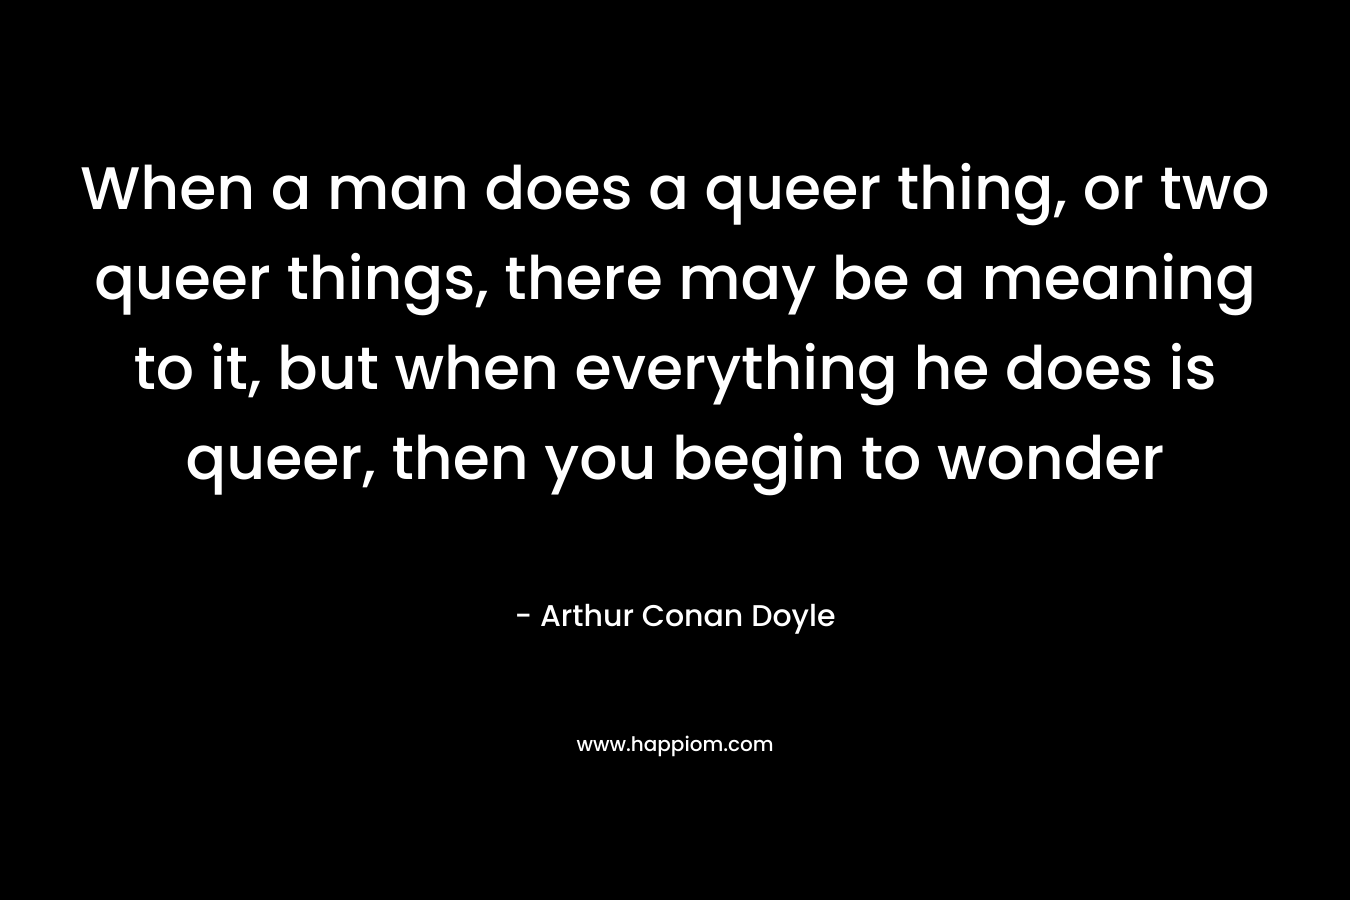 When a man does a queer thing, or two queer things, there may be a meaning to it, but when everything he does is queer, then you begin to wonder – Arthur Conan Doyle